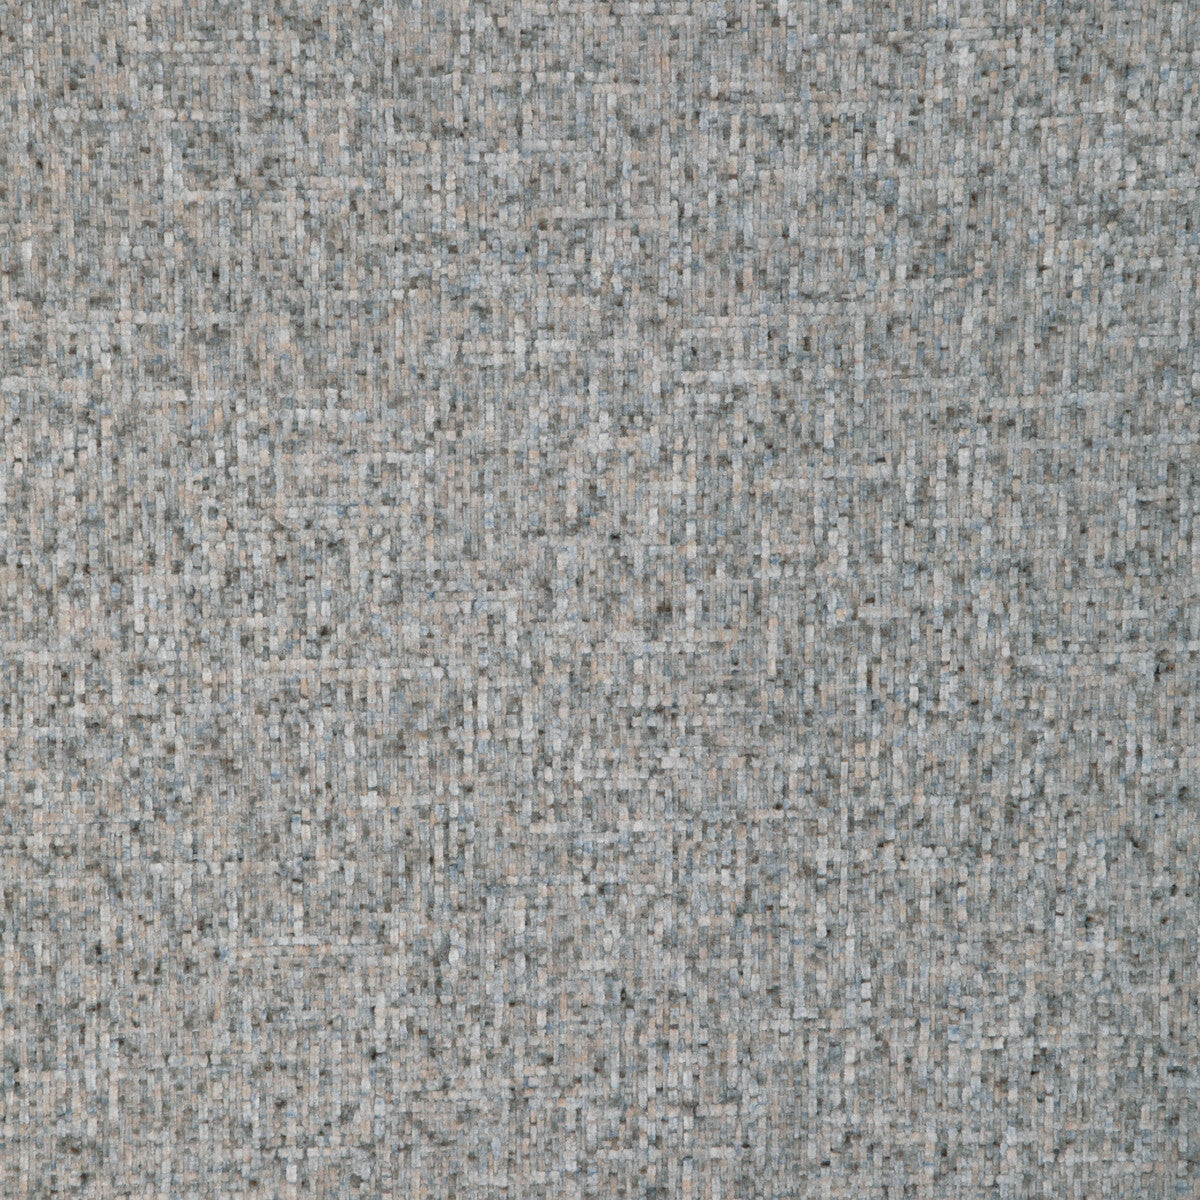 Wondrous fabric in stone color - pattern 36833.1511.0 - by Kravet Basics in the Candice Olson collection